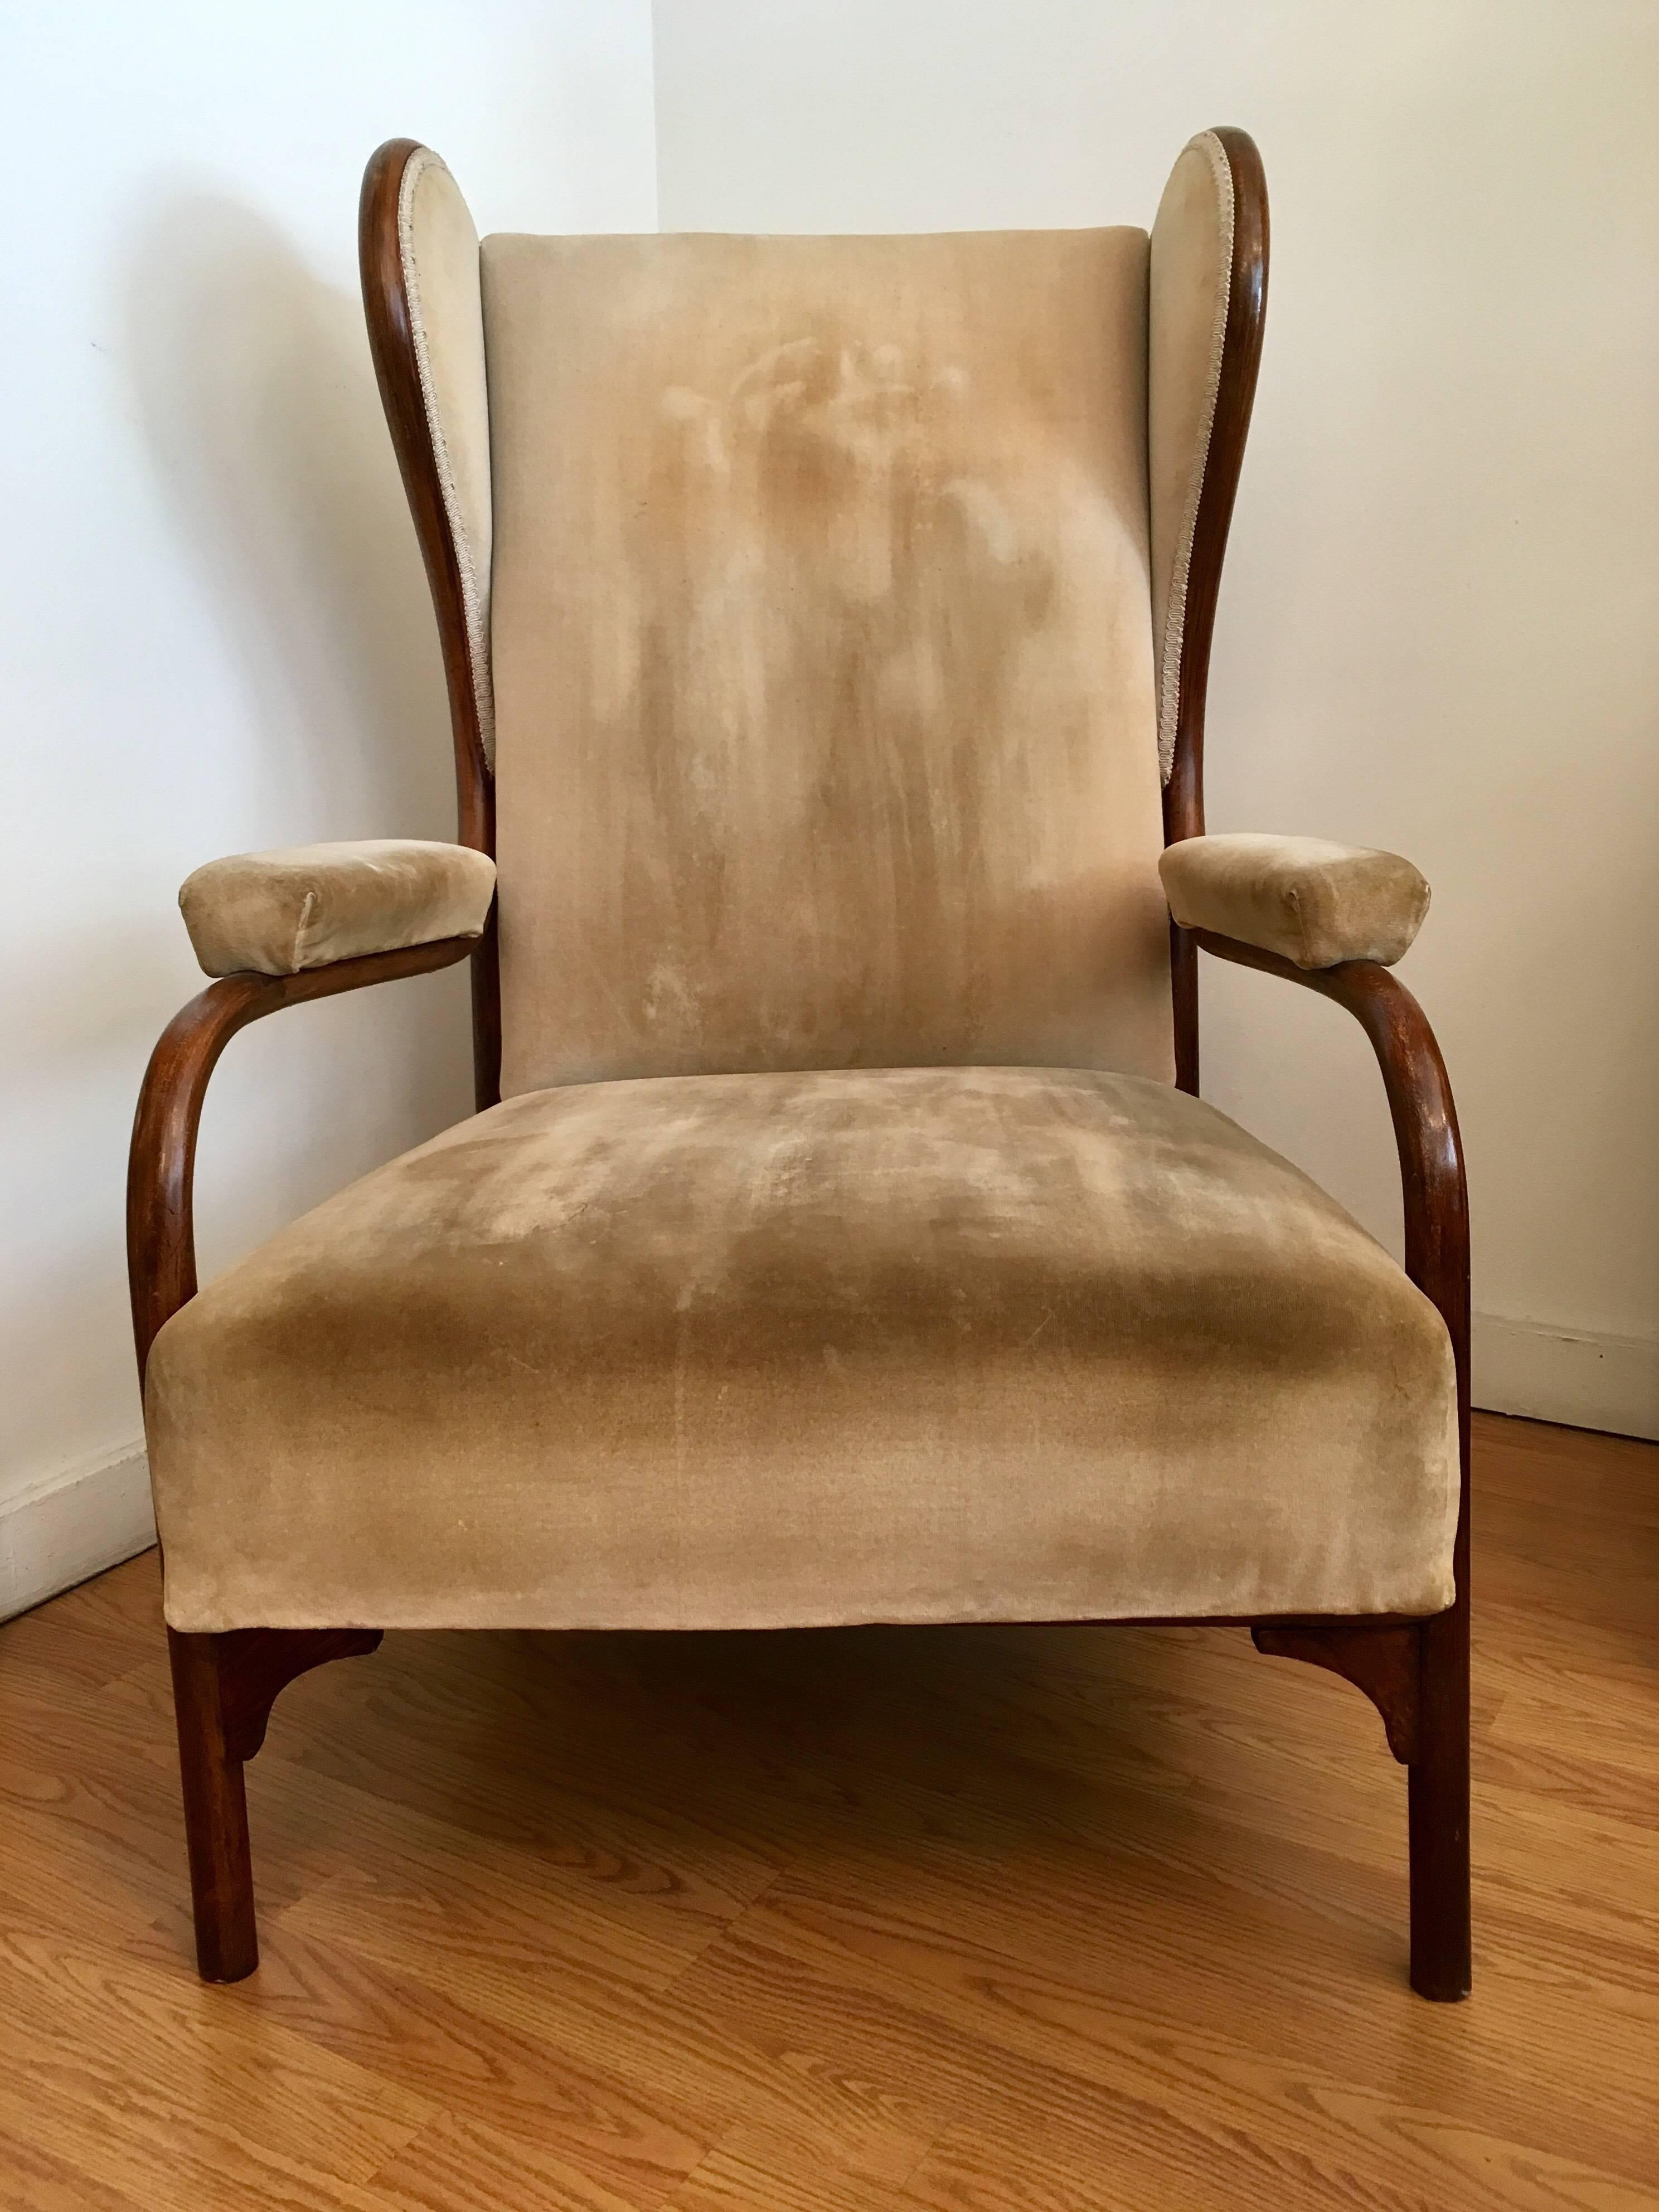 A rare model 6541 stained bent beechwood and upholstered velvet wing chair designed by Gebrüder Thonet in 1904. 
Factory label
Literature: Thonet factory catalog year 1904 page 121.

 